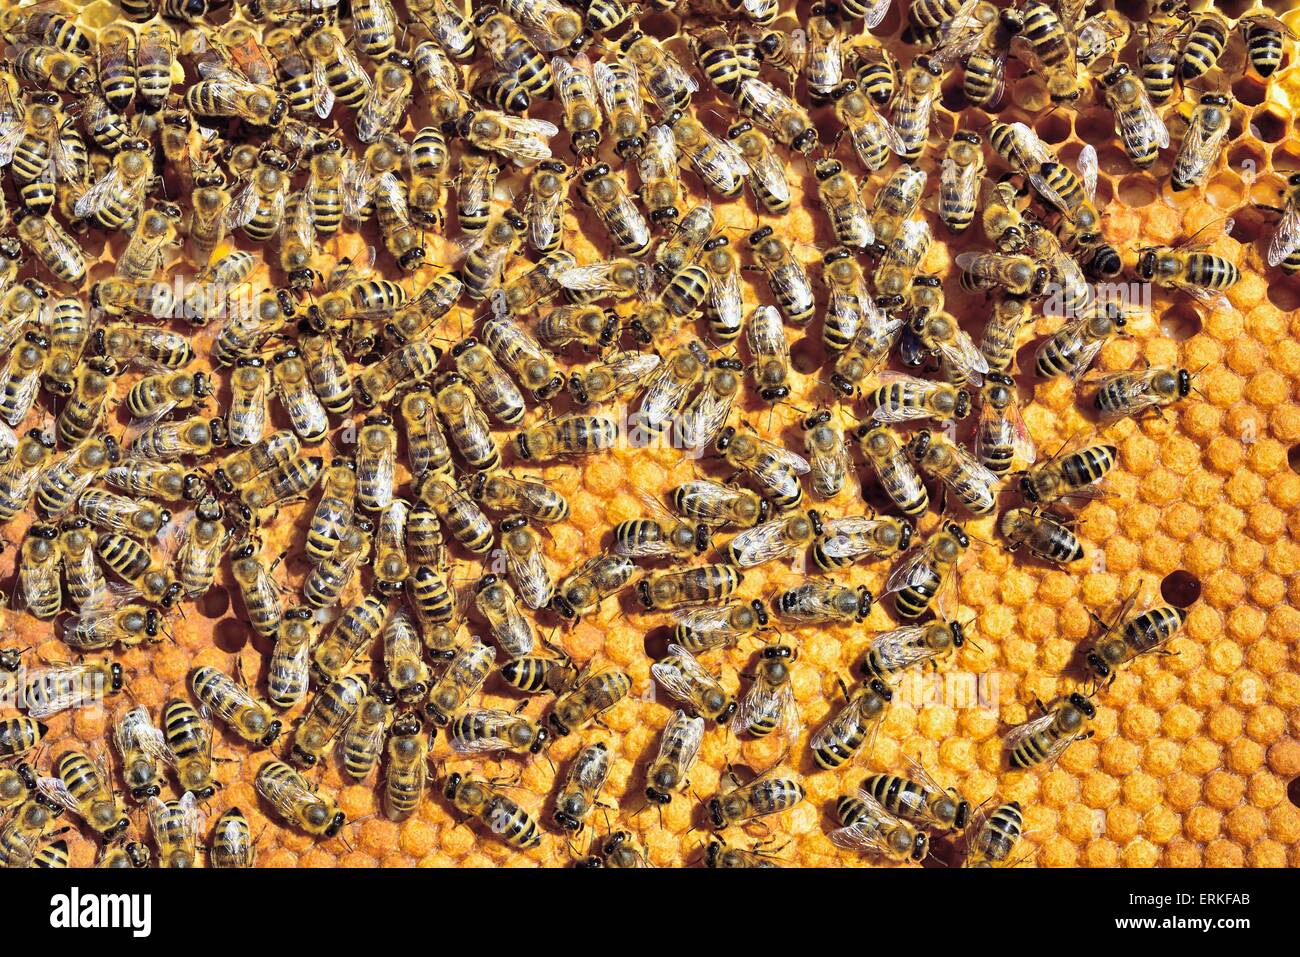 European Honey Bees (Apis mellifera var. carnica) on honeycomb with capped brood cells, Bavaria, Germany Stock Photo